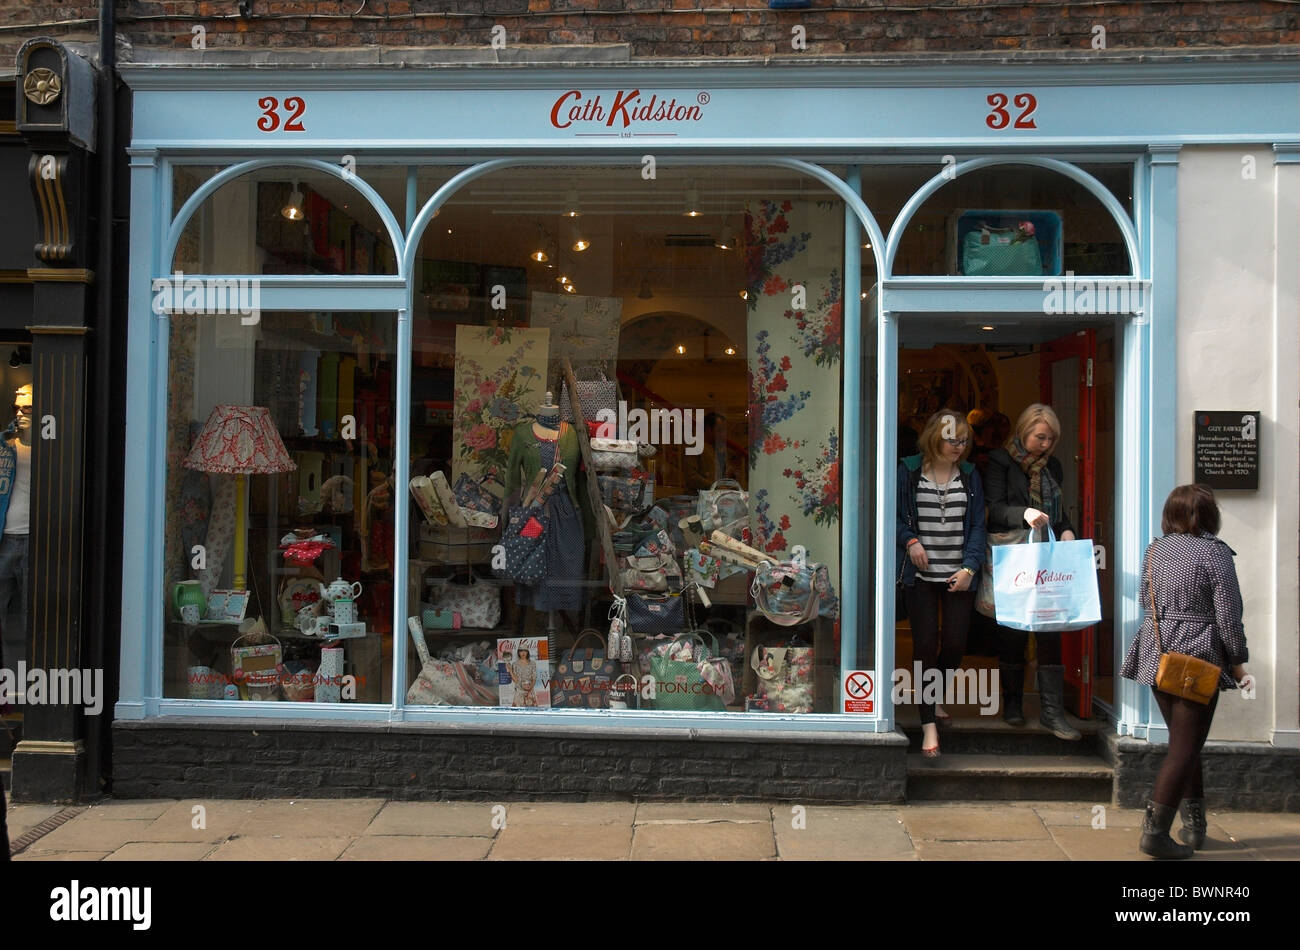 Shoppers exiting a Cath Kidston shop in York carrying Cath Kidston bag  Stock Photo - Alamy